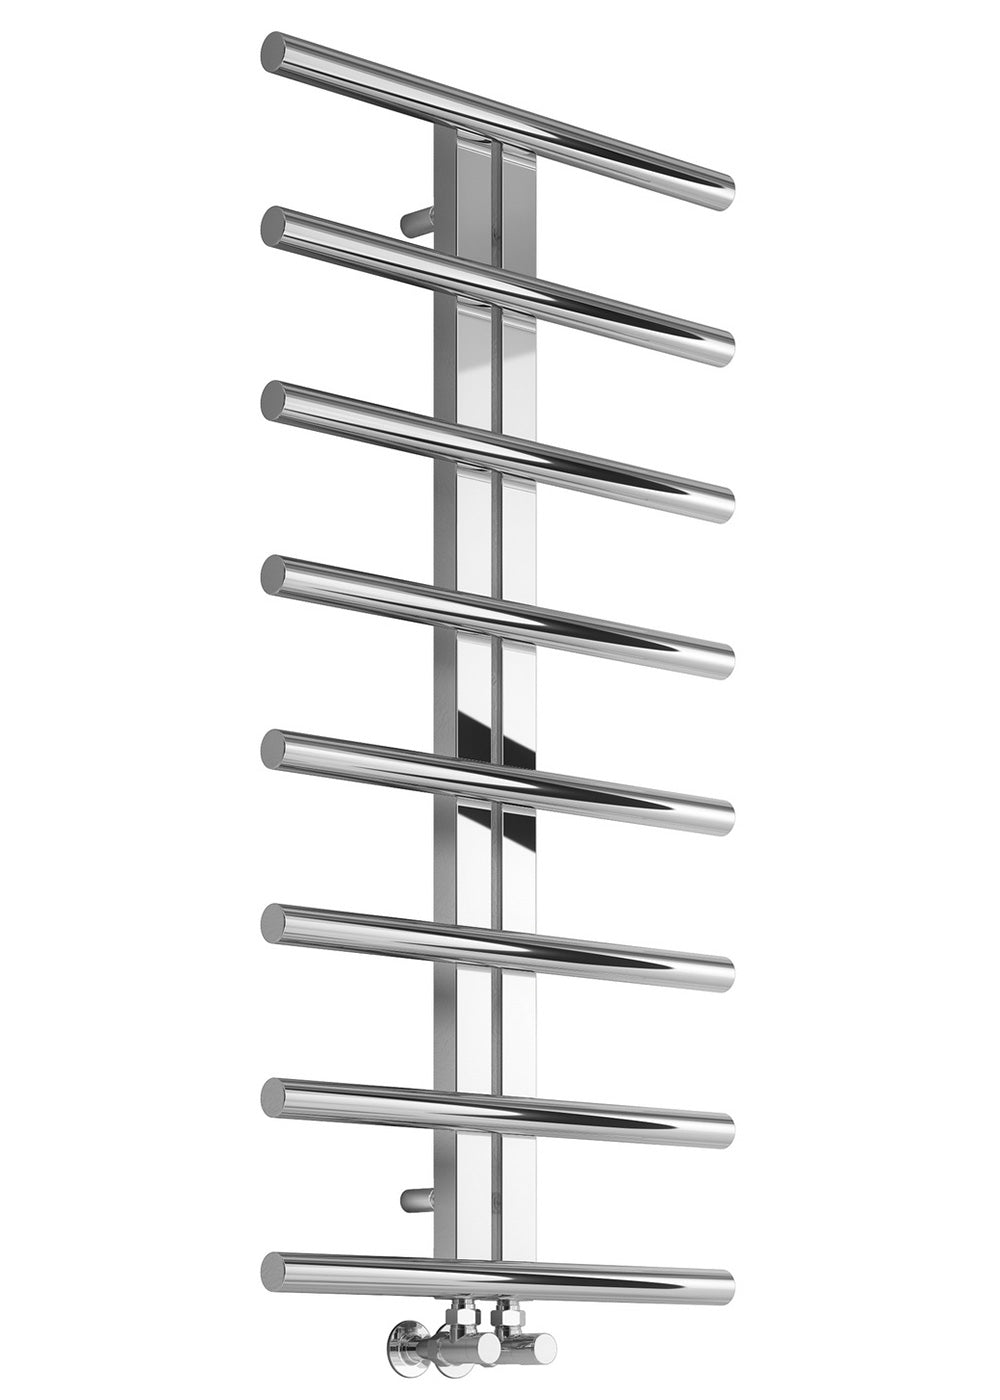 Pizzo Dual Fuel Stainless Steel Heated Towel Rail - 1000mm x 600mm - Polished Stainless Steel